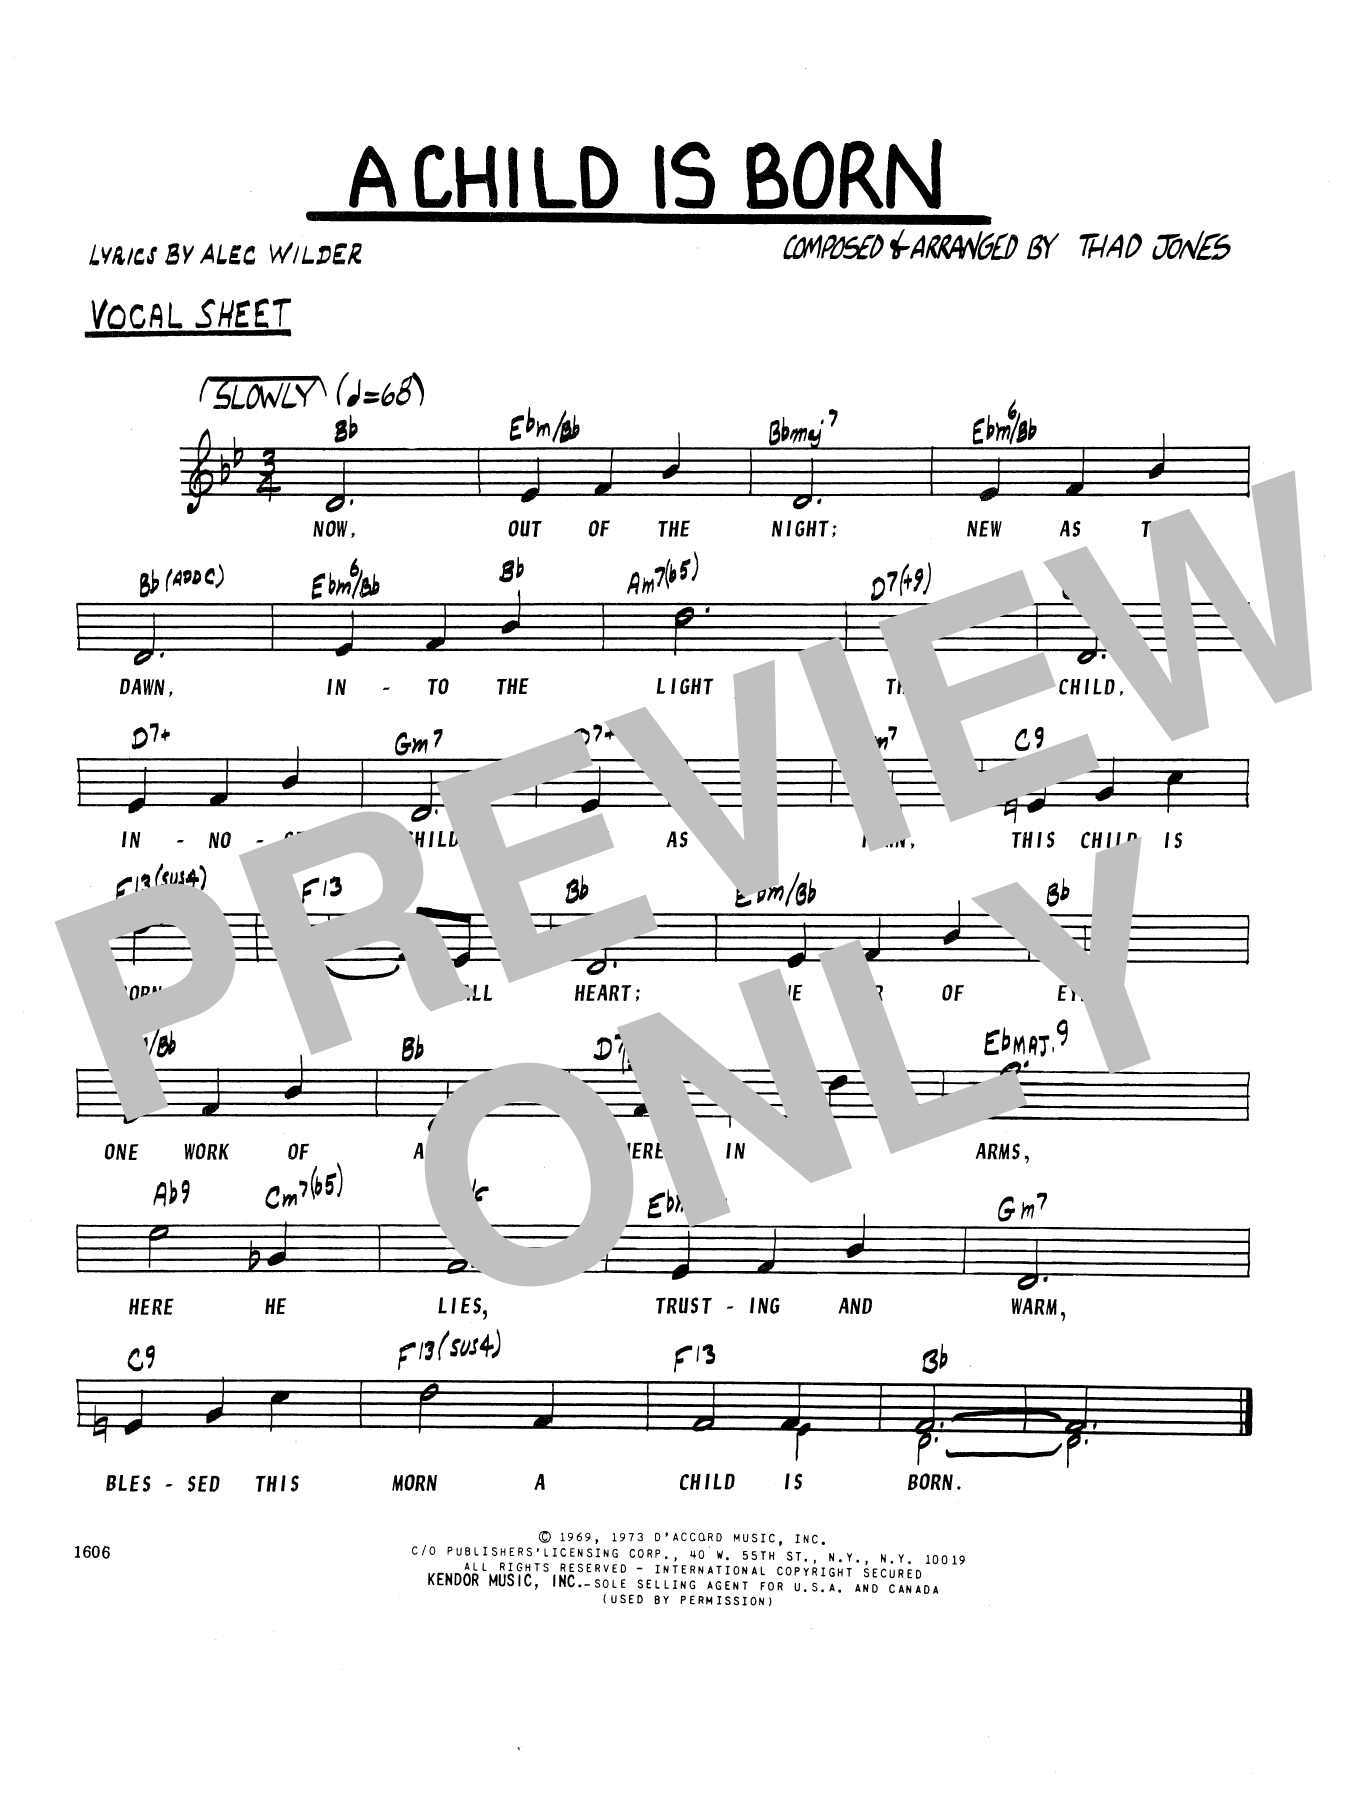 Download Thad Jones Child Is Born, A - Vocal Solo Sheet Music